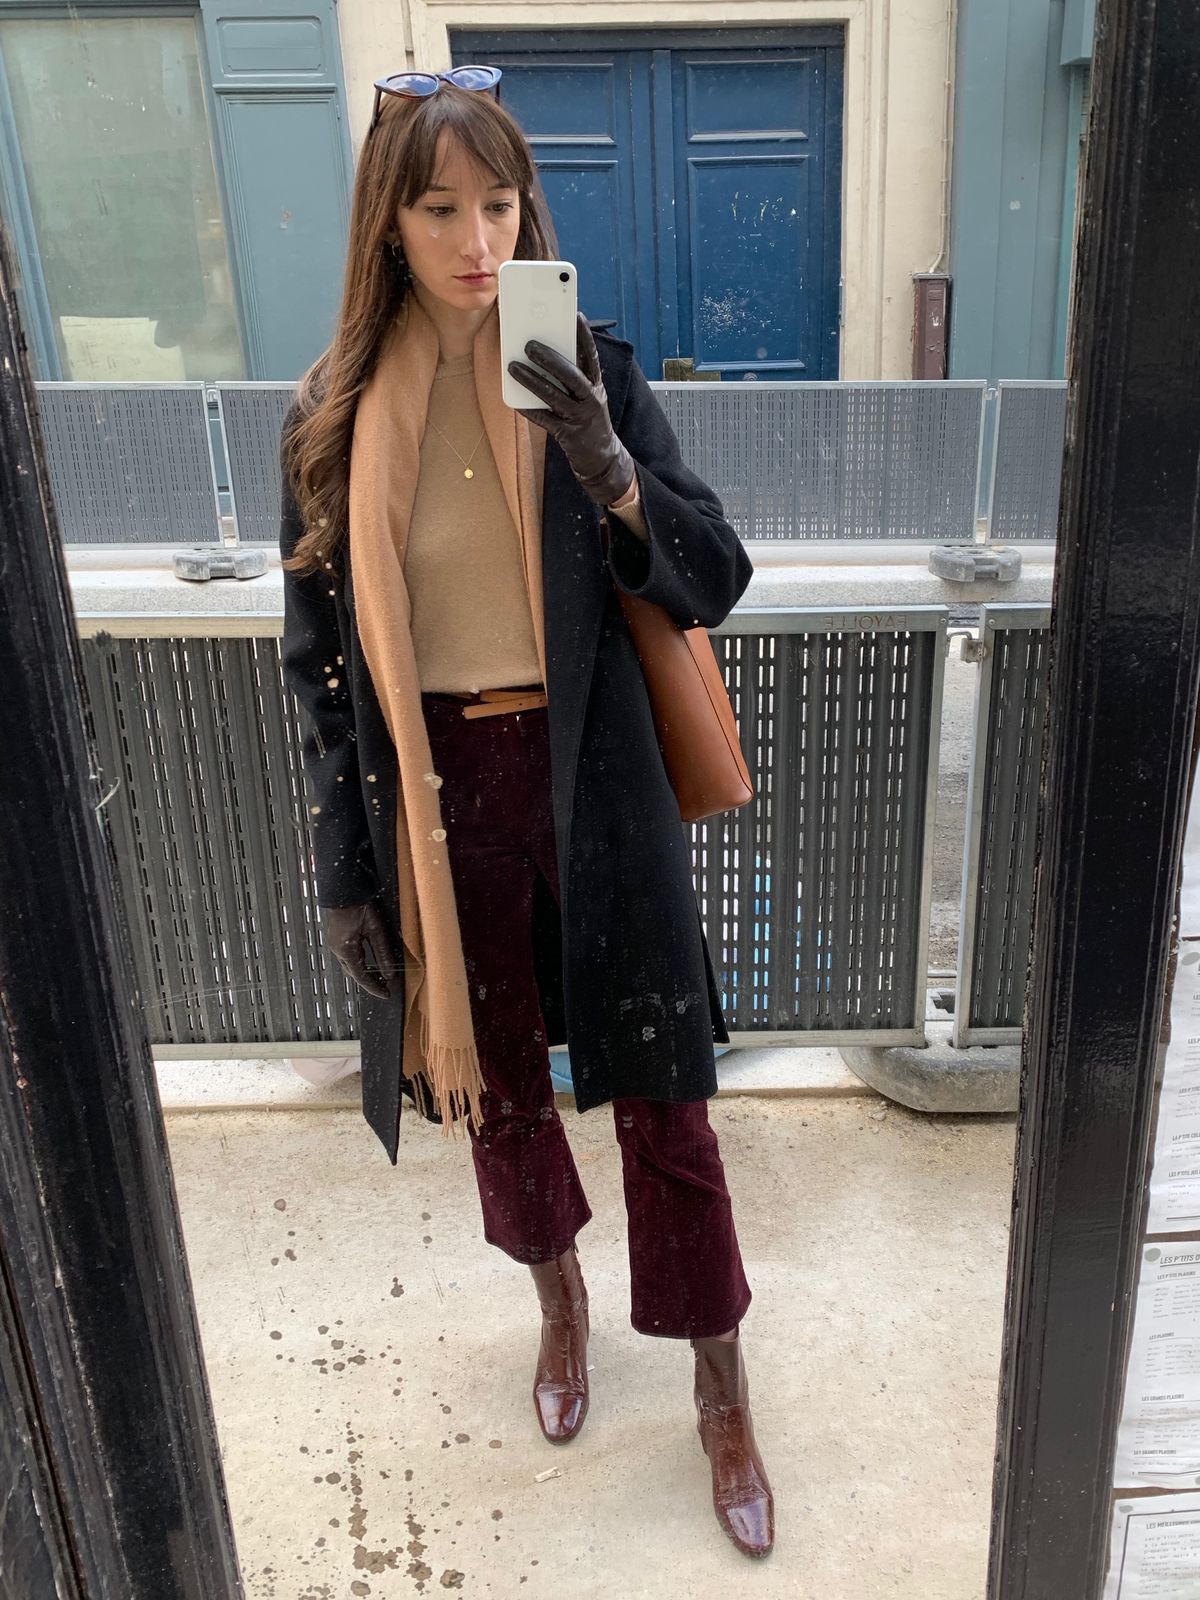 Parisian Winter Look: Bordeaux cropped pants by & Other Stories, Everlane Brown Leather Tote Bag